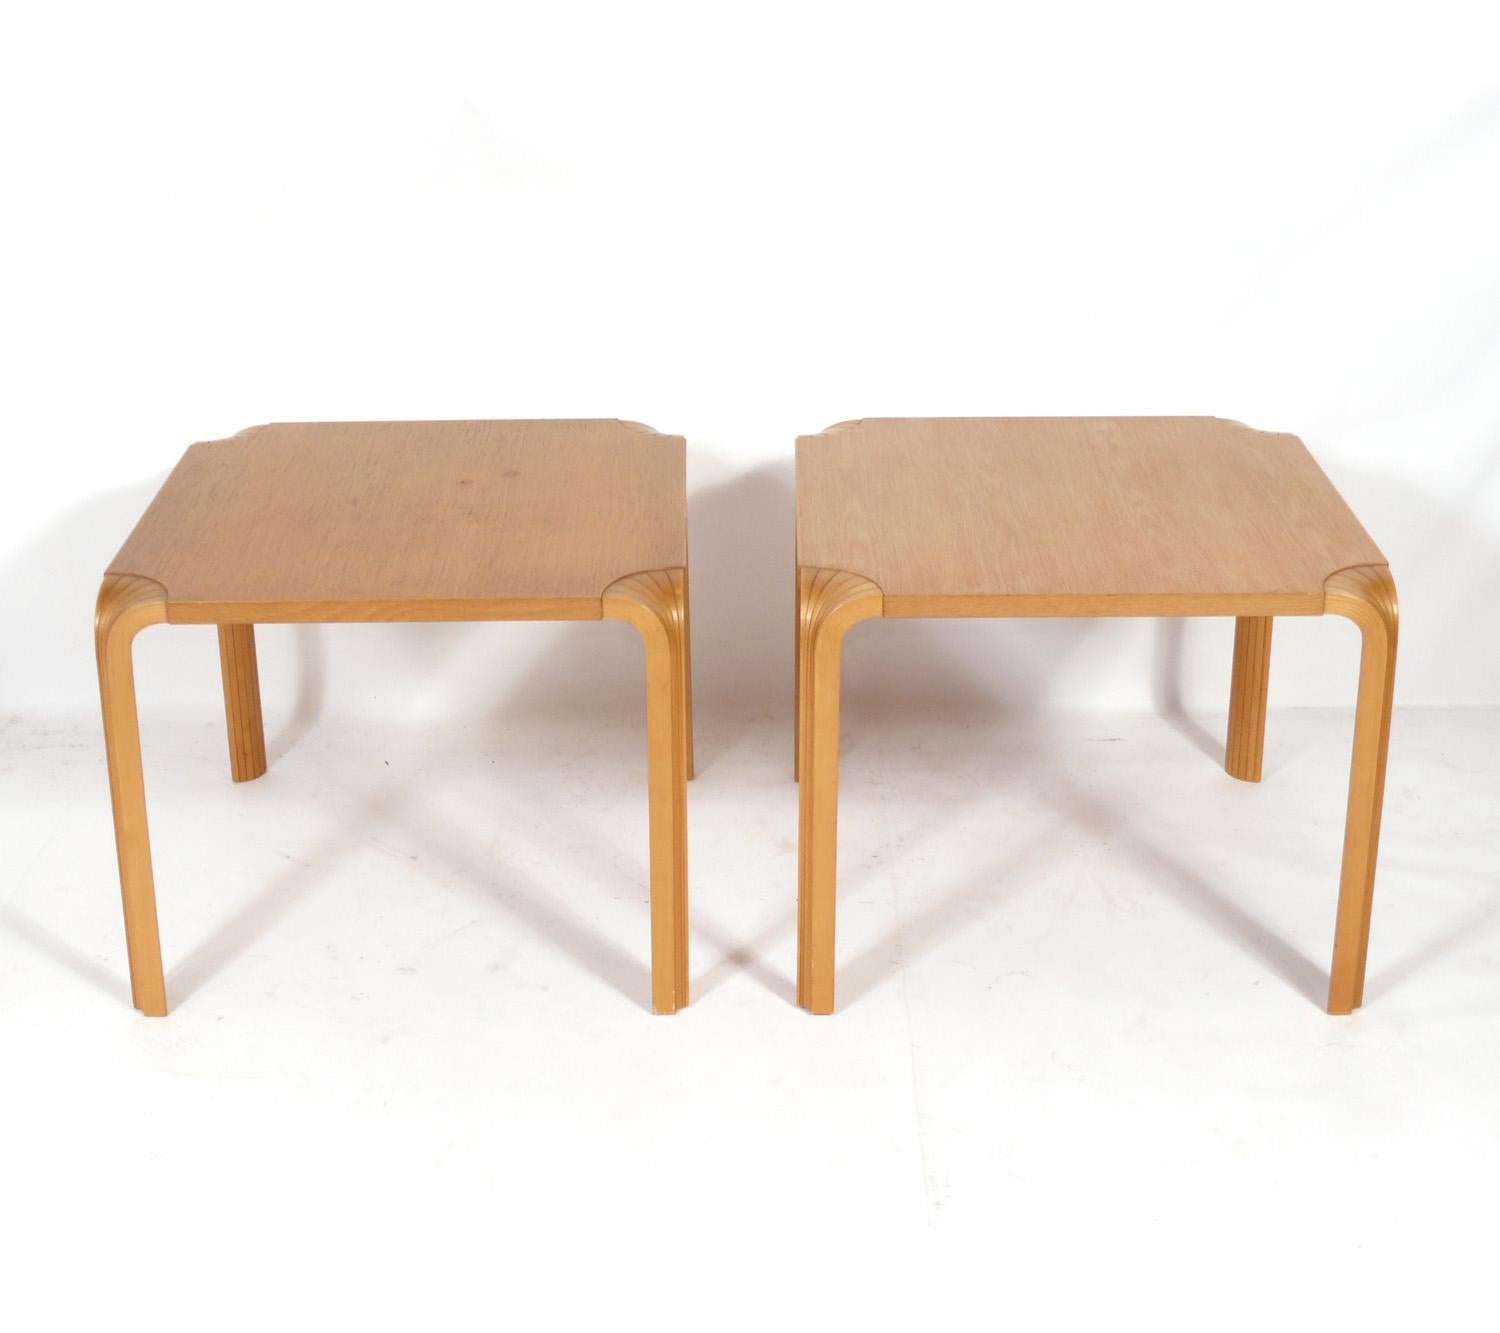 Pair of Alvar Aalto end tables, for Artek, Finland, circa 1980s. They retain their warm original patina. They are a versatile size and can be used as end or side tables, or as night stands.